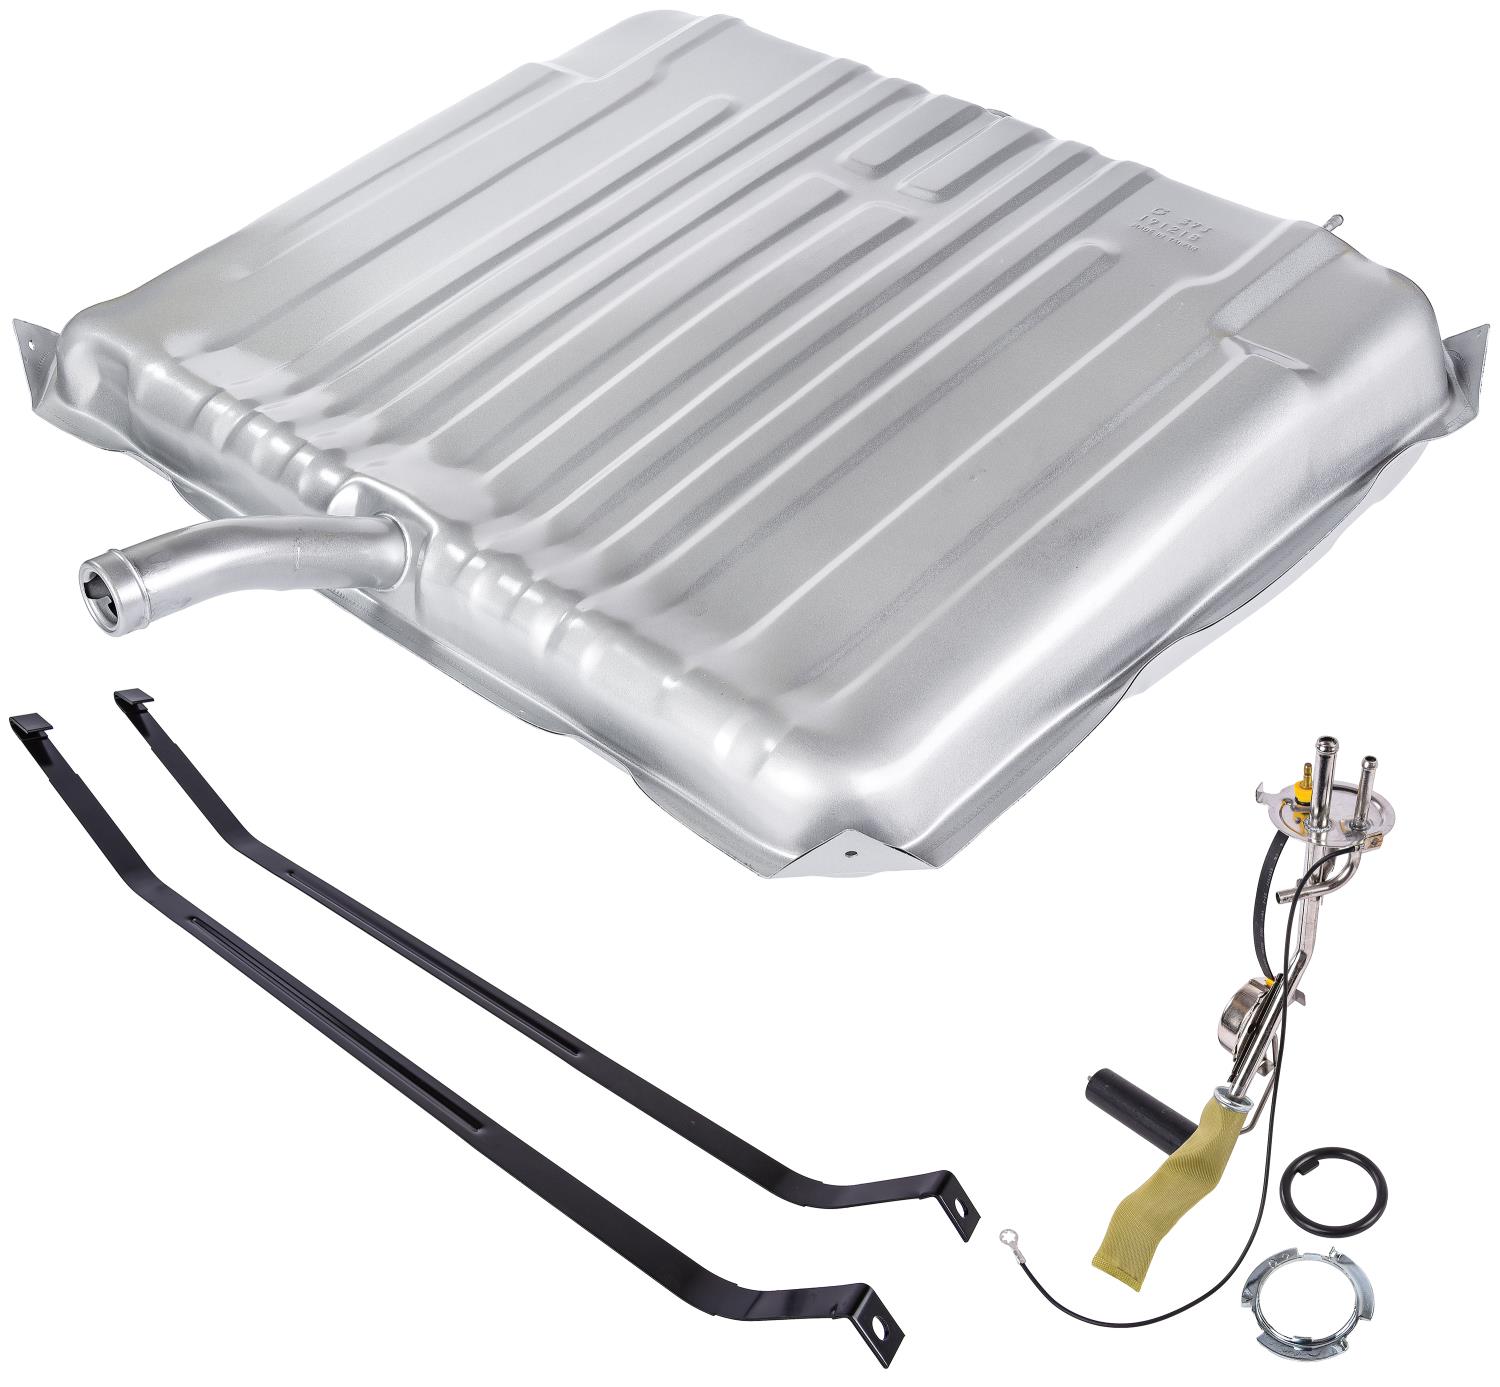 Fuel Tank Kit with Straps & Sending Unit for 1964-1966 Buick Skylark & Special [21.5-Gallon]